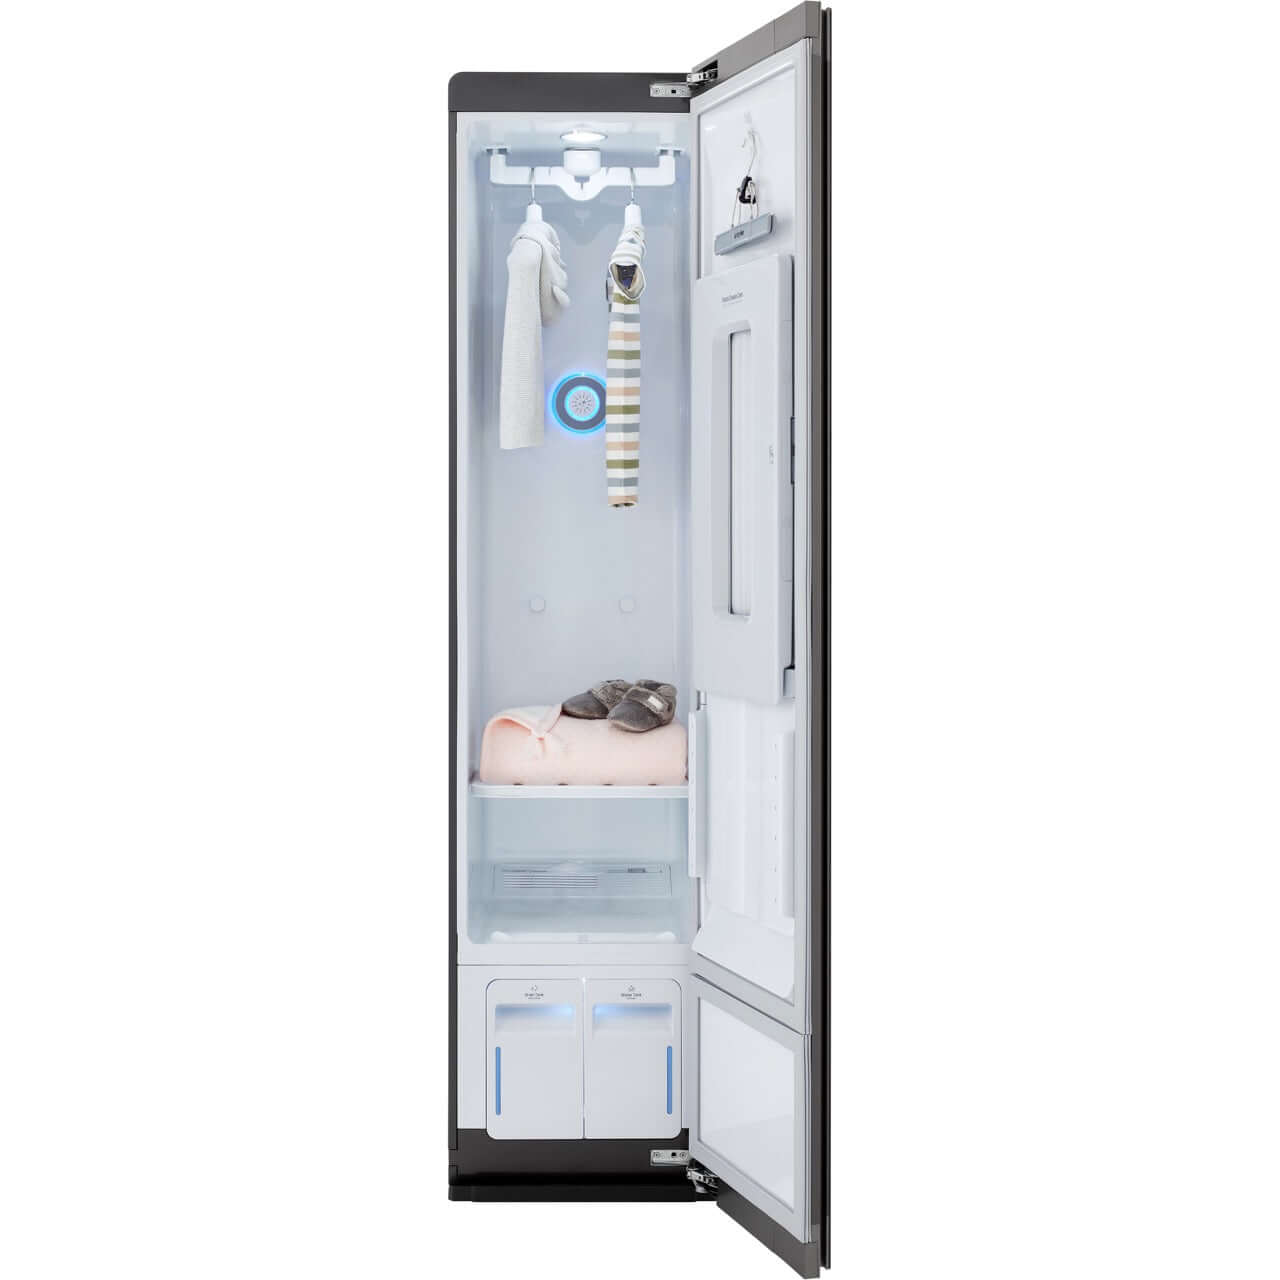 LG Styler - Smart Wi-Fi Enabled Steam Clothing Care System in Mirror Finish (S3MFBN)